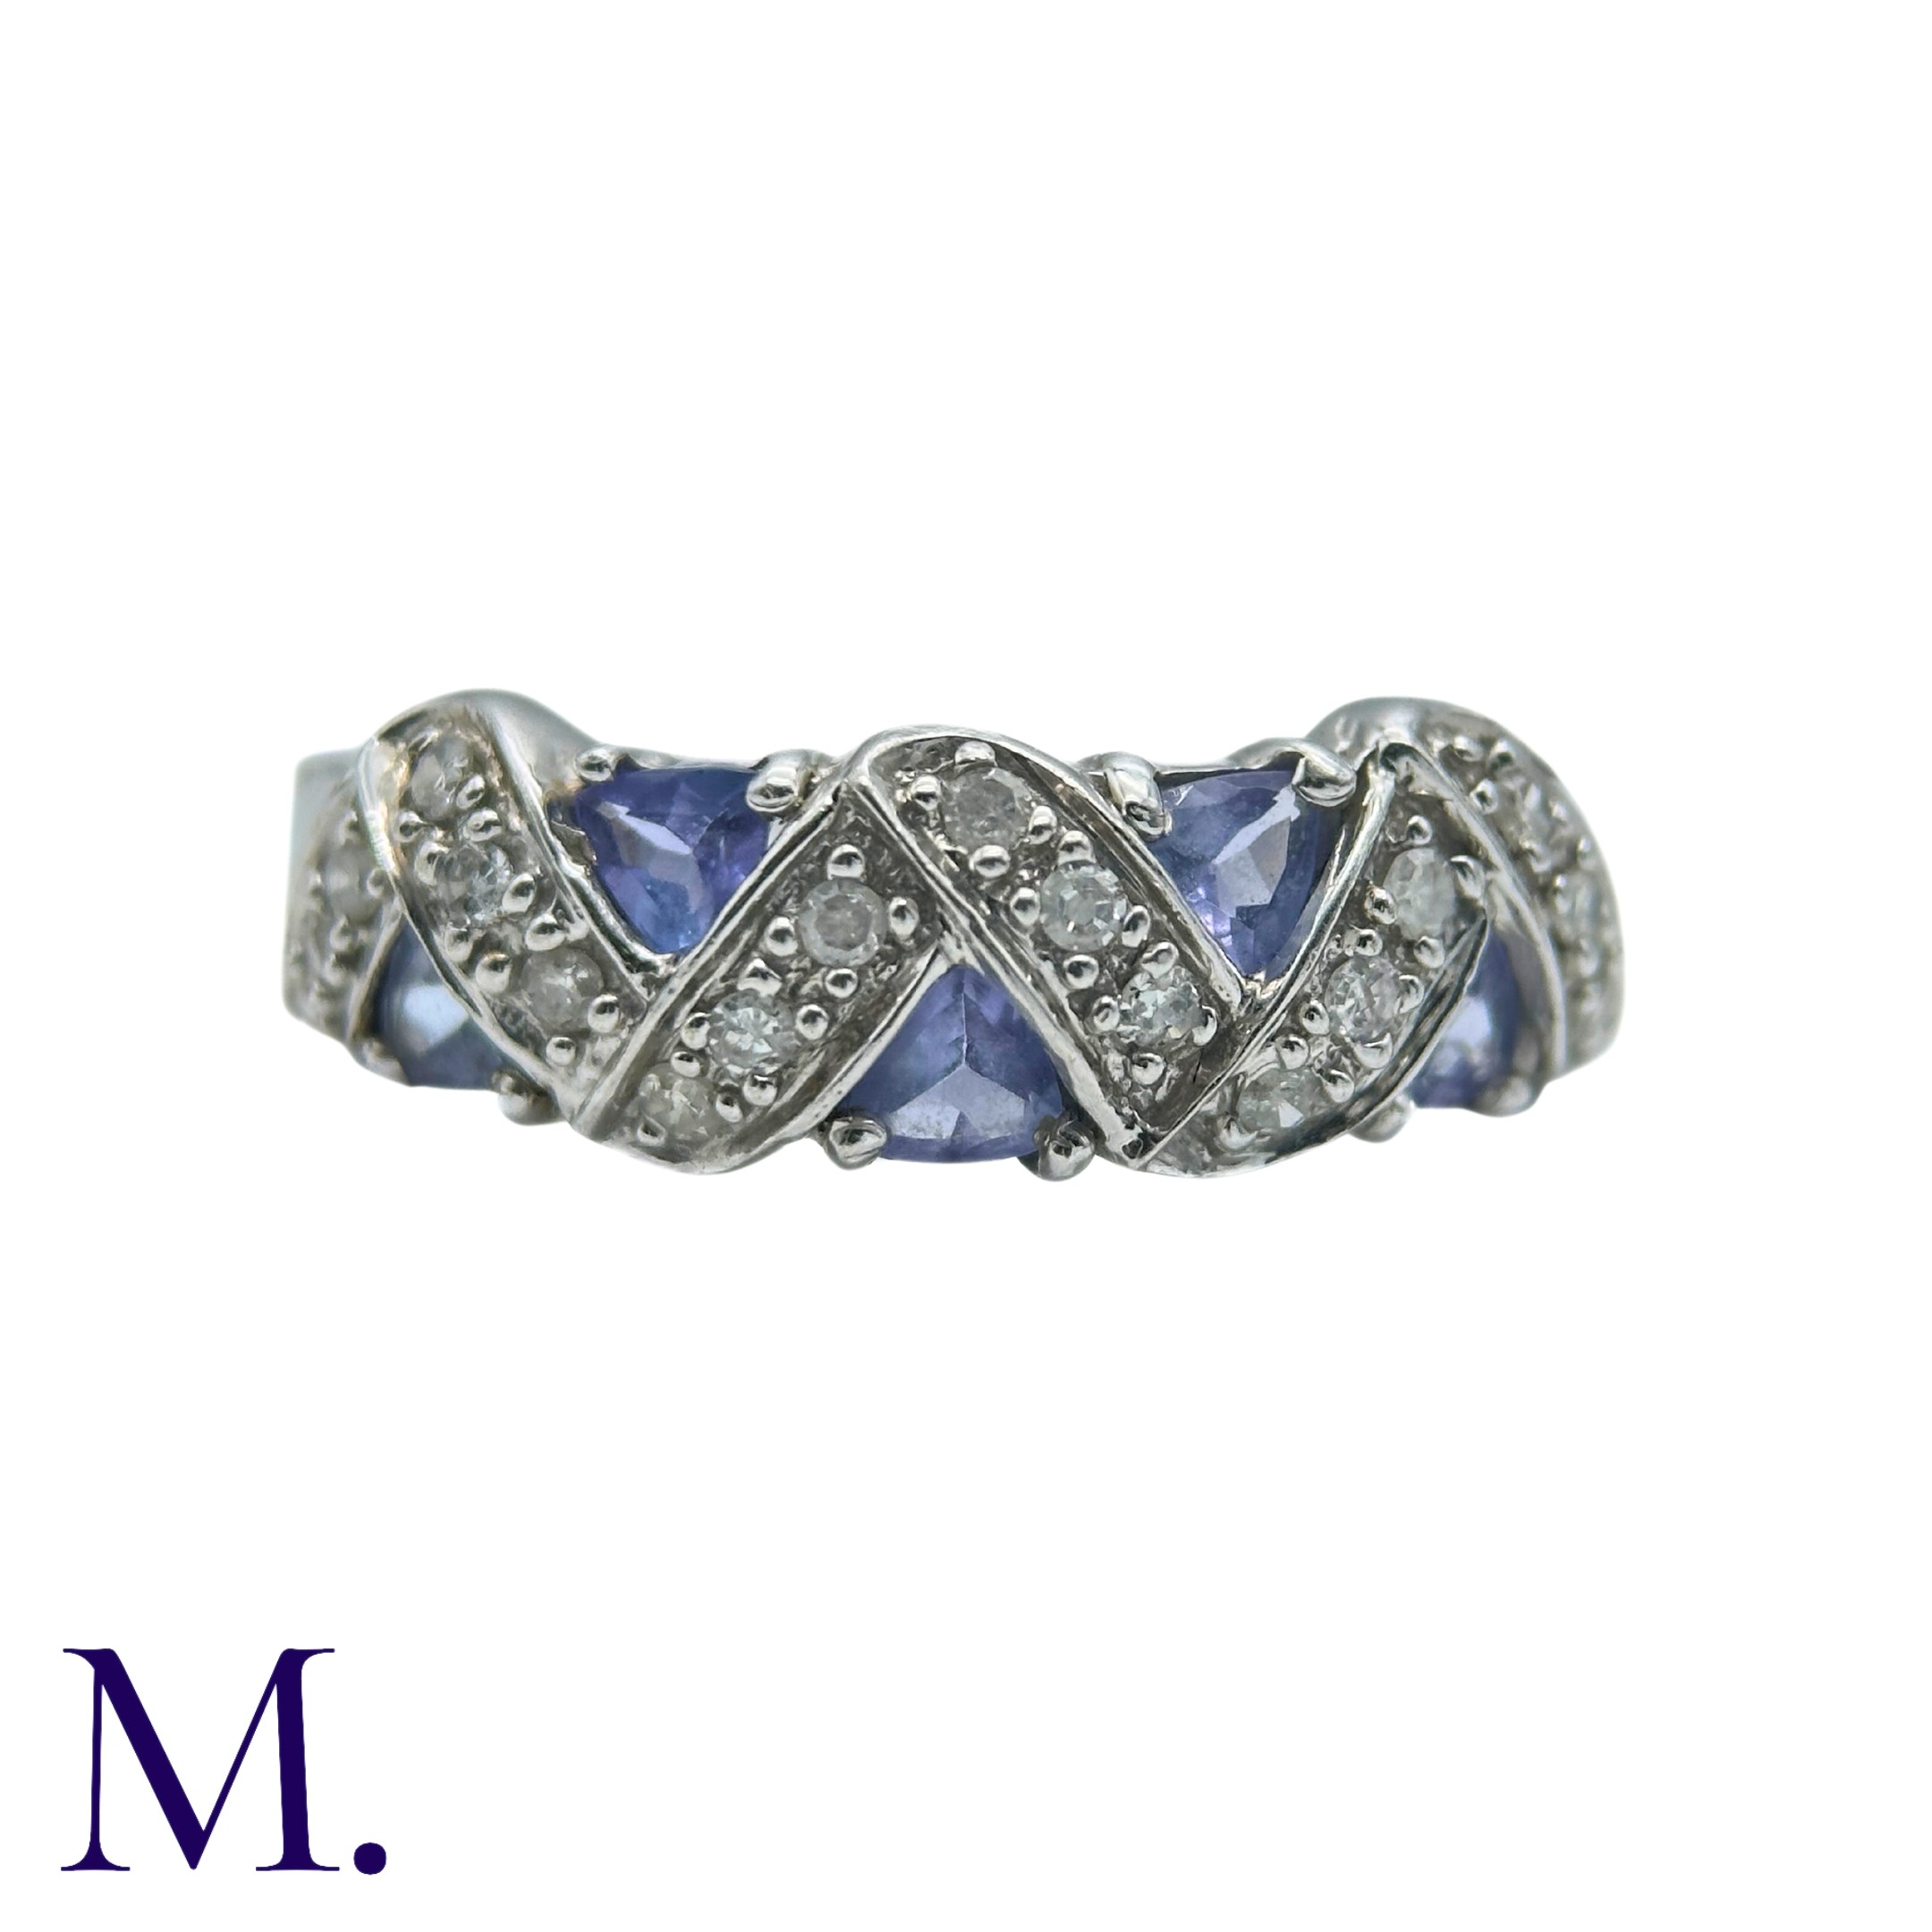 A Tanzanite And Diamond Ring in 9k white gold, set with trillion cut tanzanites and round cut